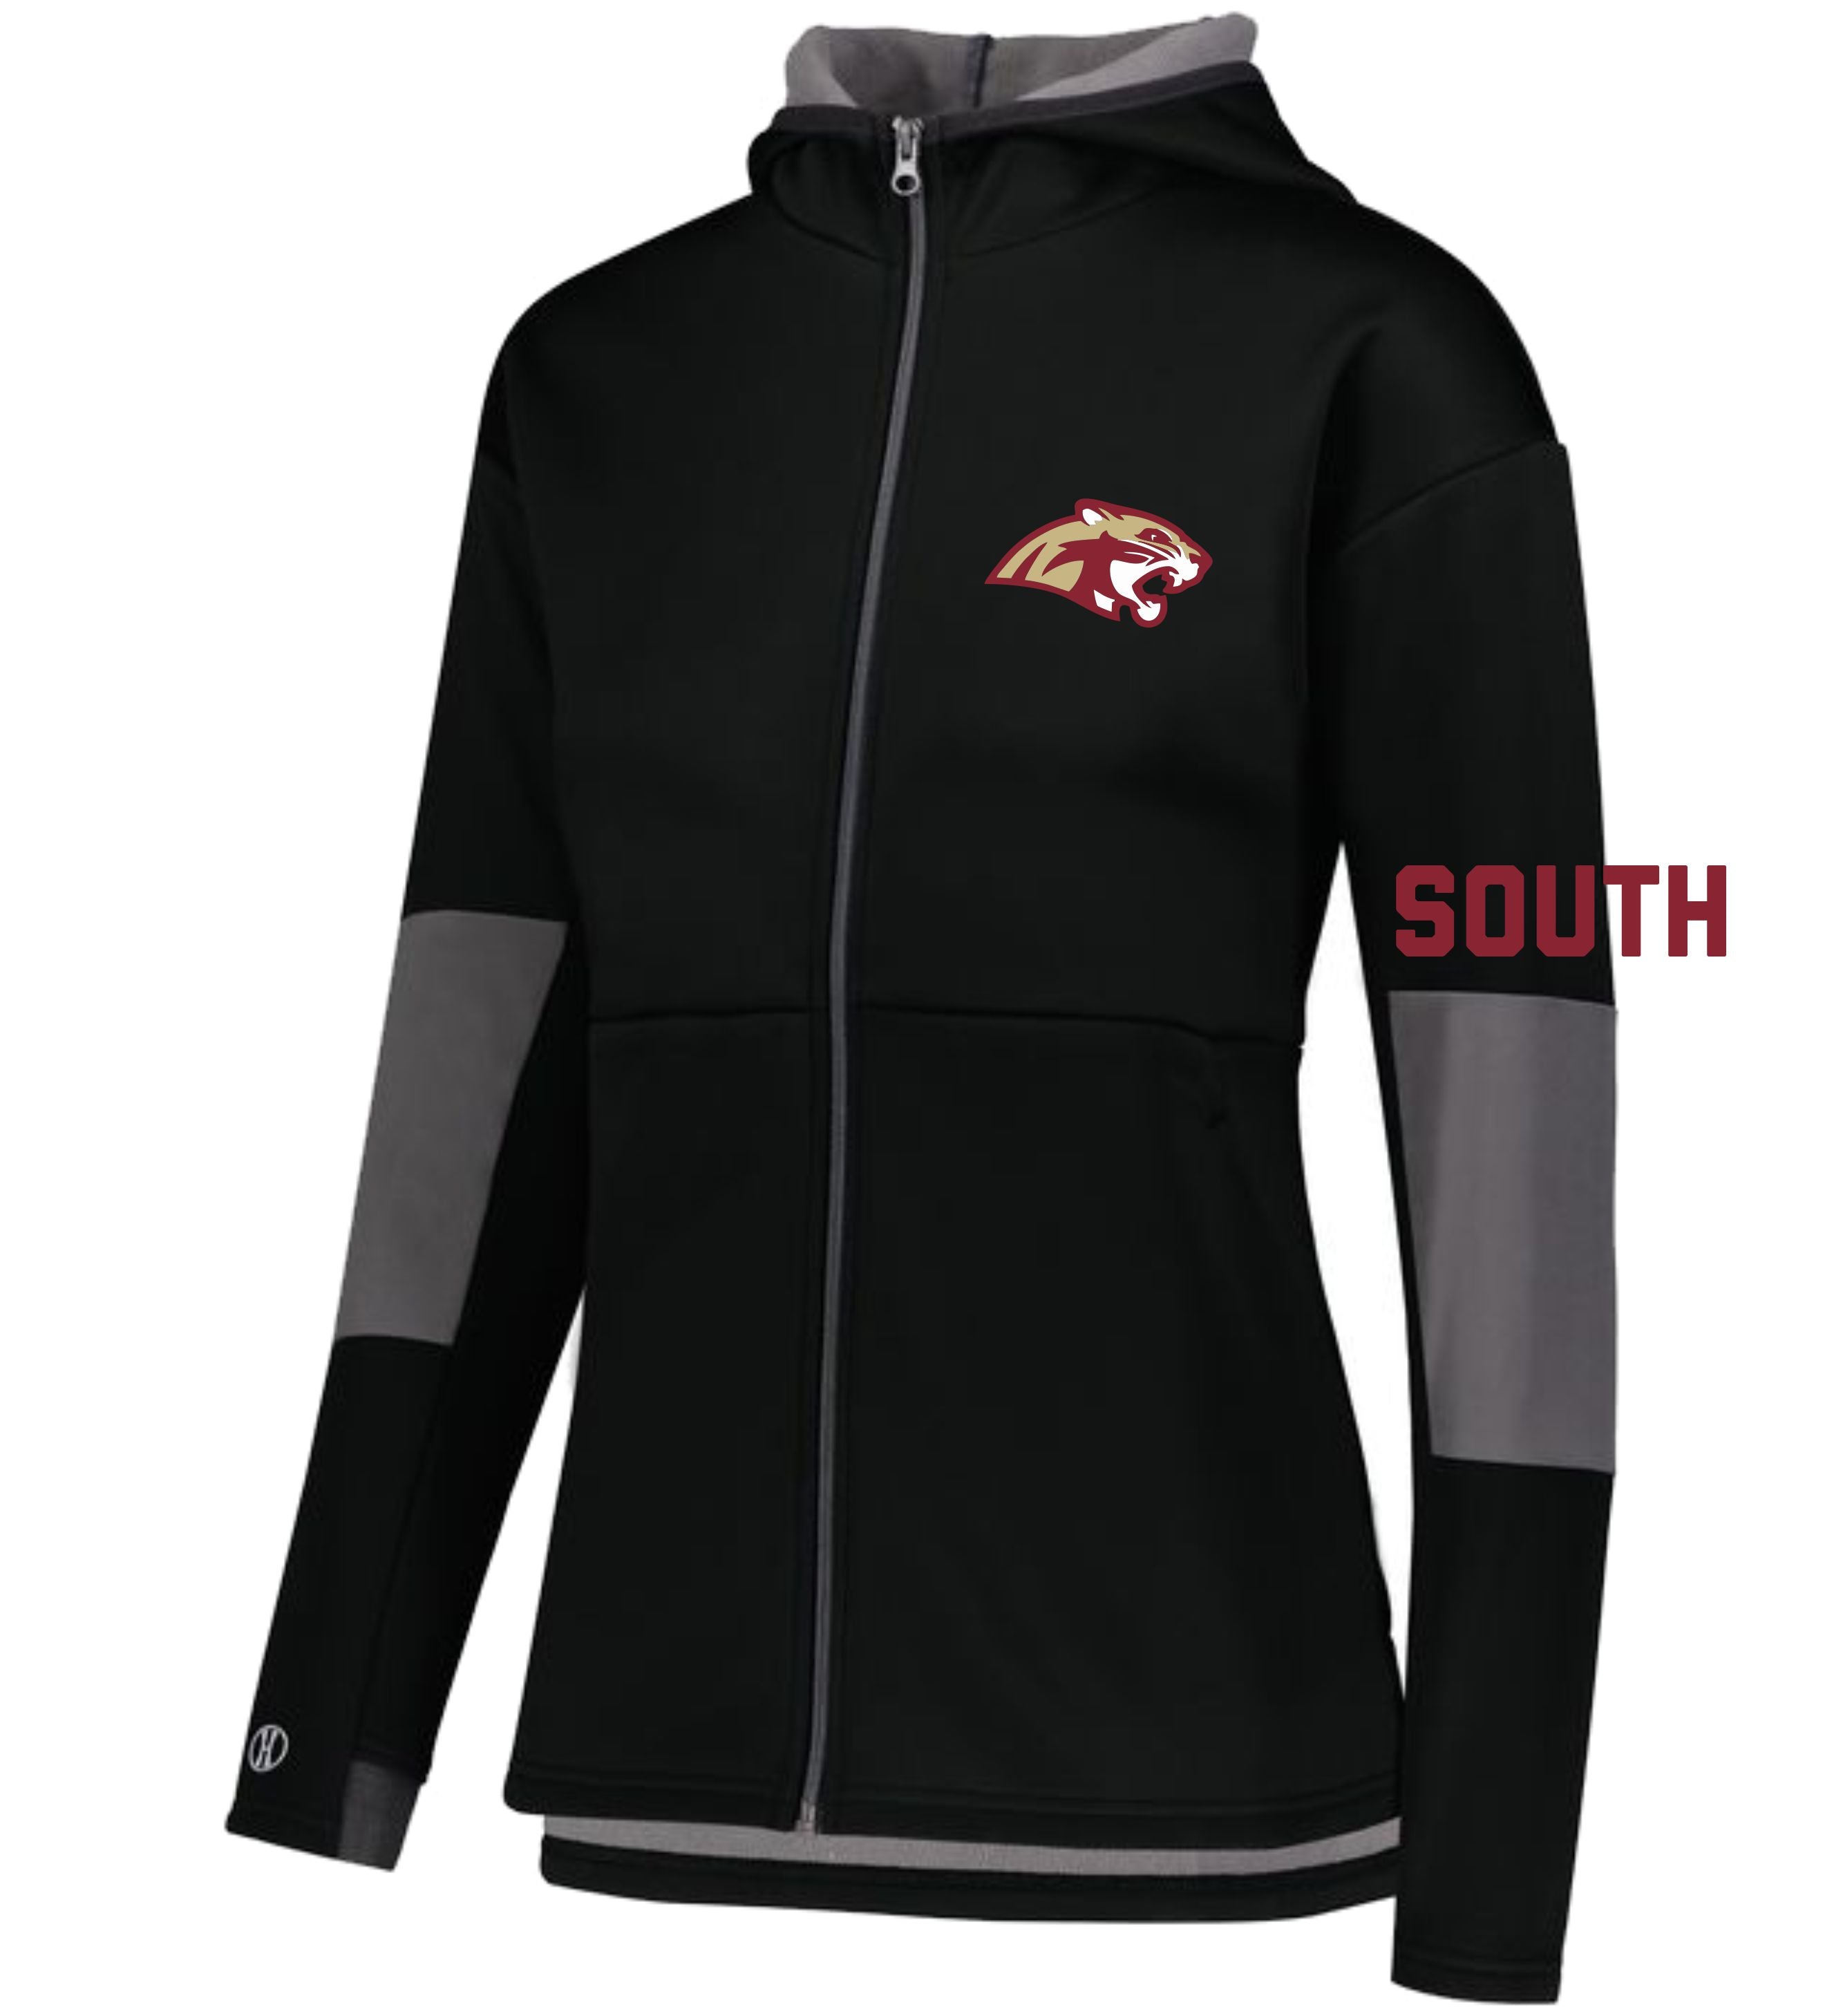 South Performance Hooded Zip-Up